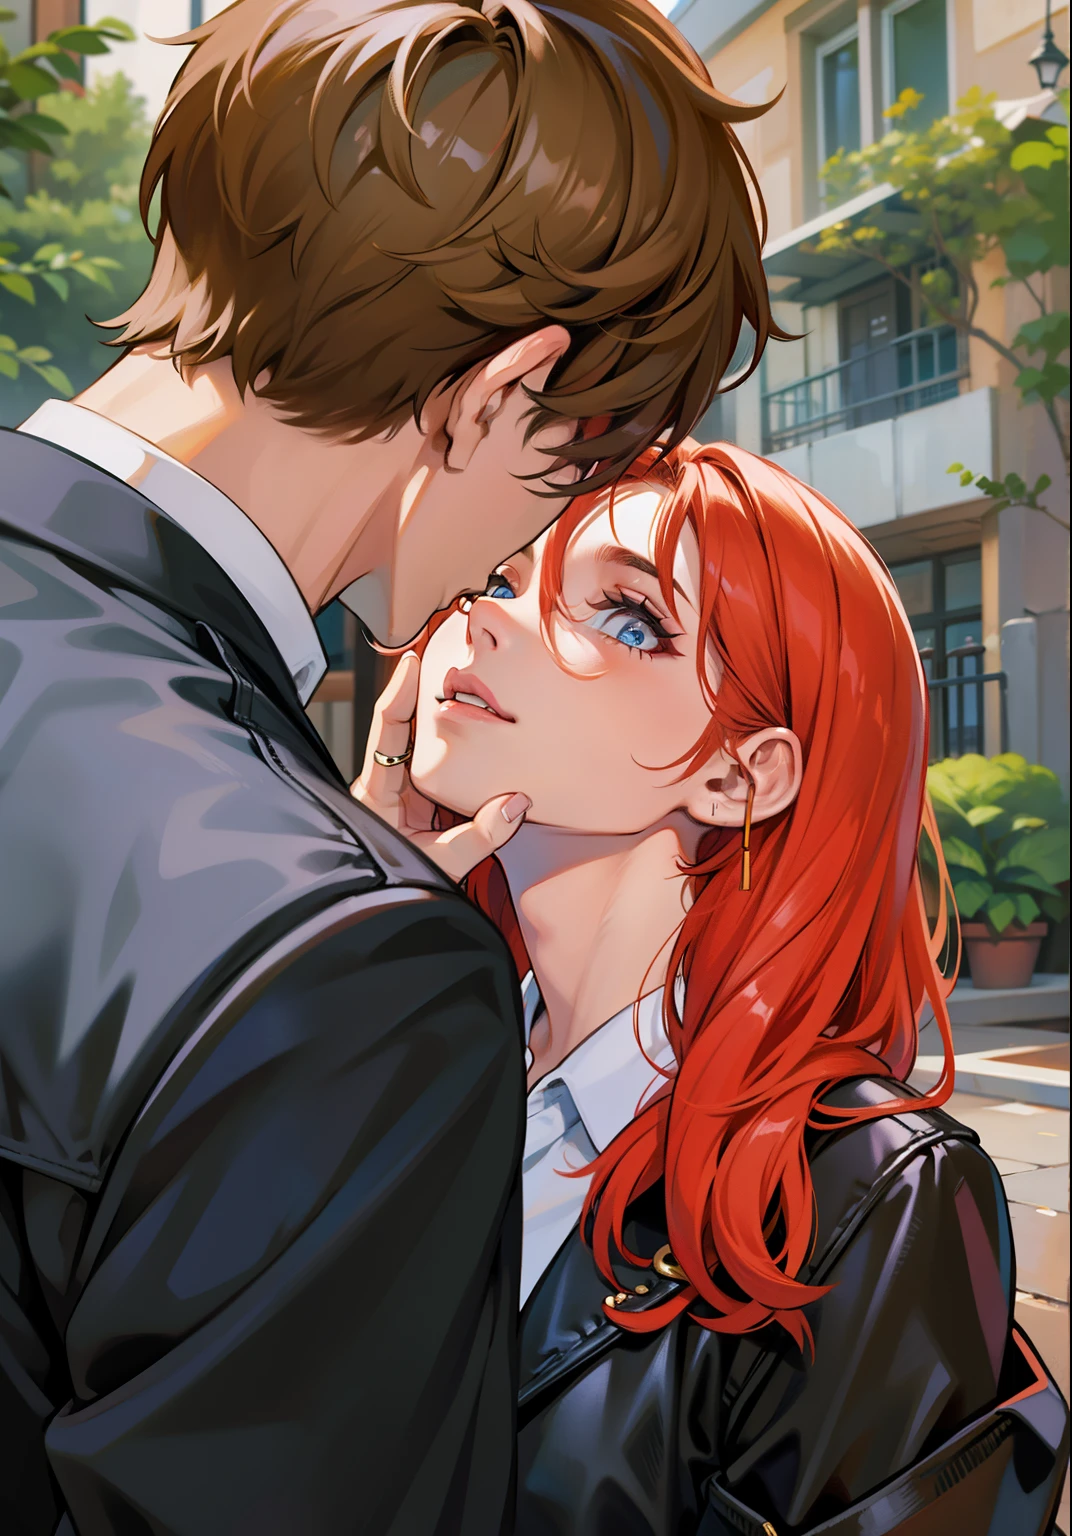 A boy with brown hair takes the face of a girl with red hair and eyes